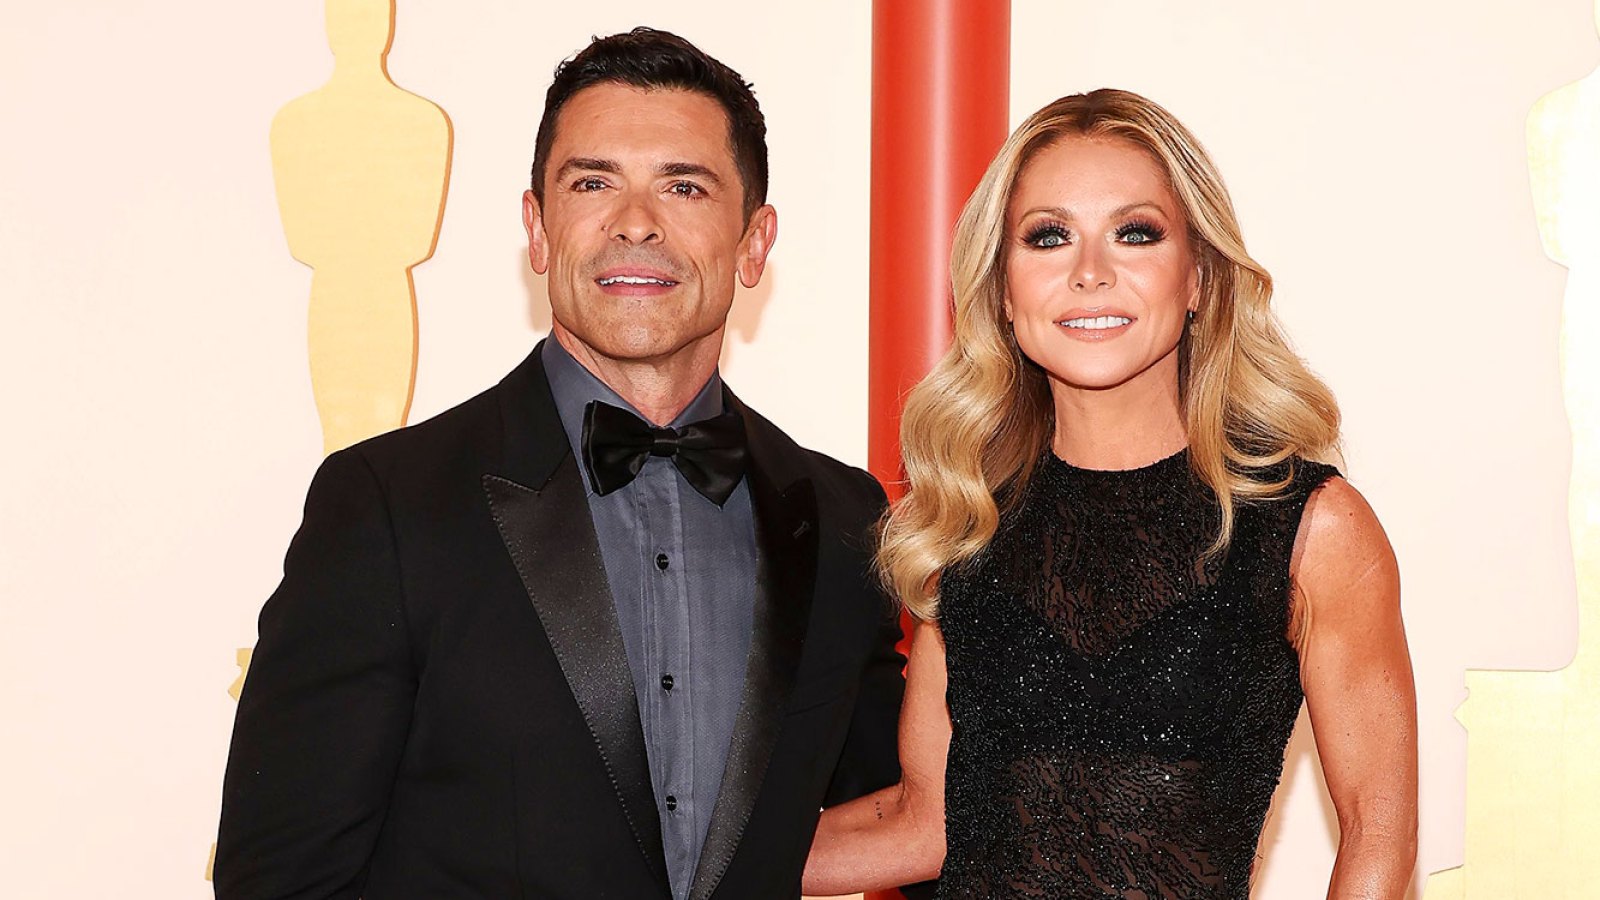 Kelly Ripa Jokes She and Husband Mark Consuelos Took Vow of Chasity Before Cohosting Live